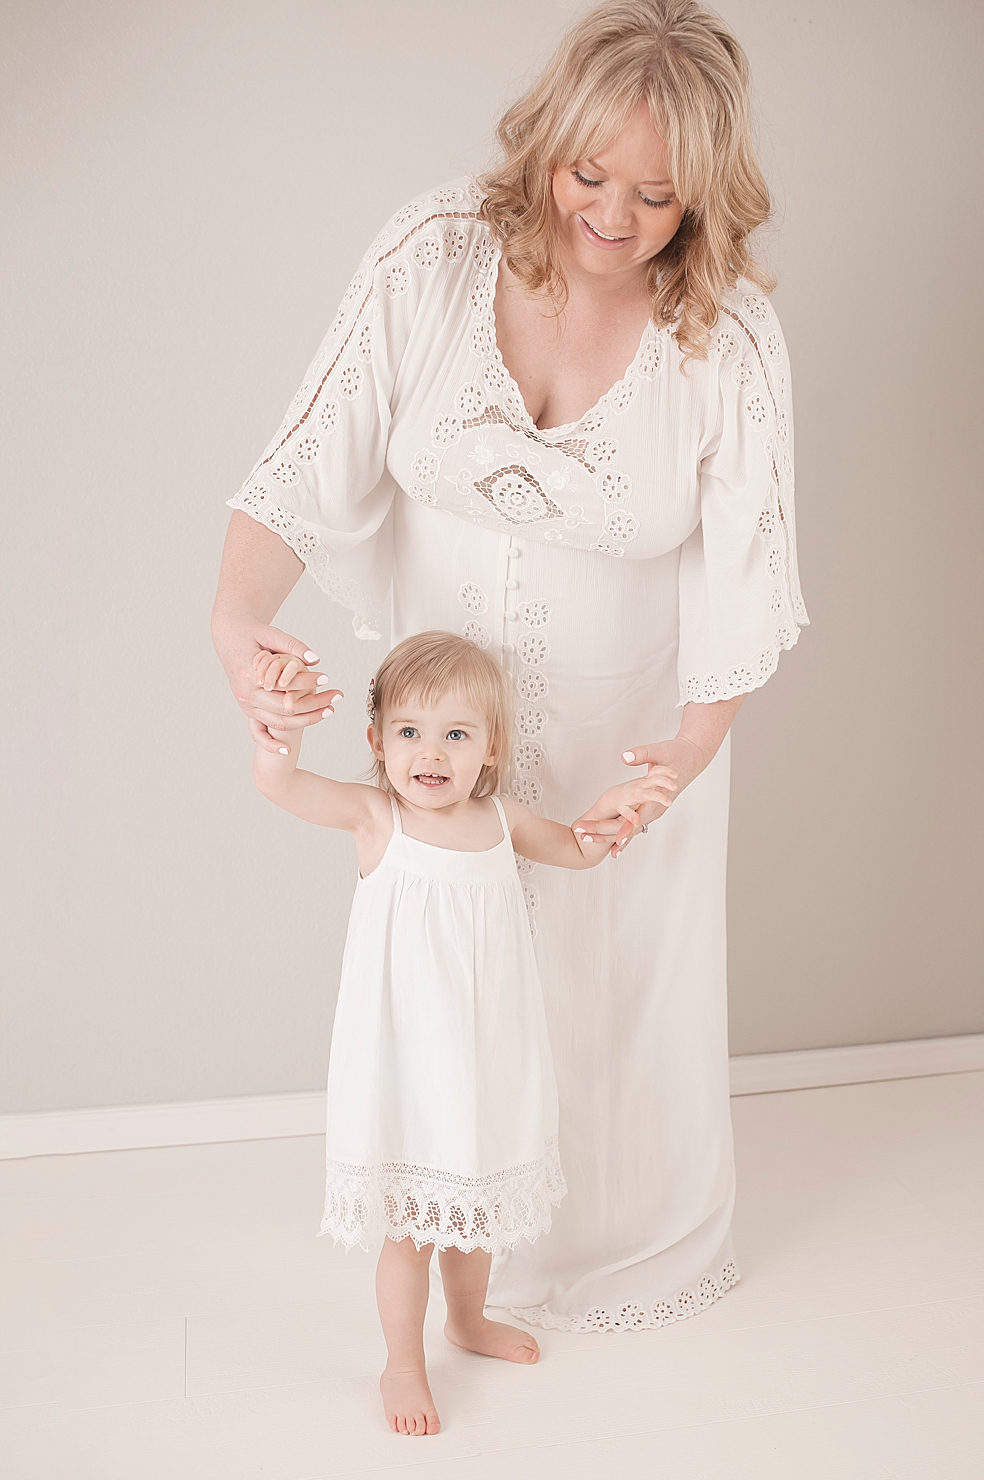 Mom holding hands with toddler girl in white dress | Photo by Jessica Lee Photography